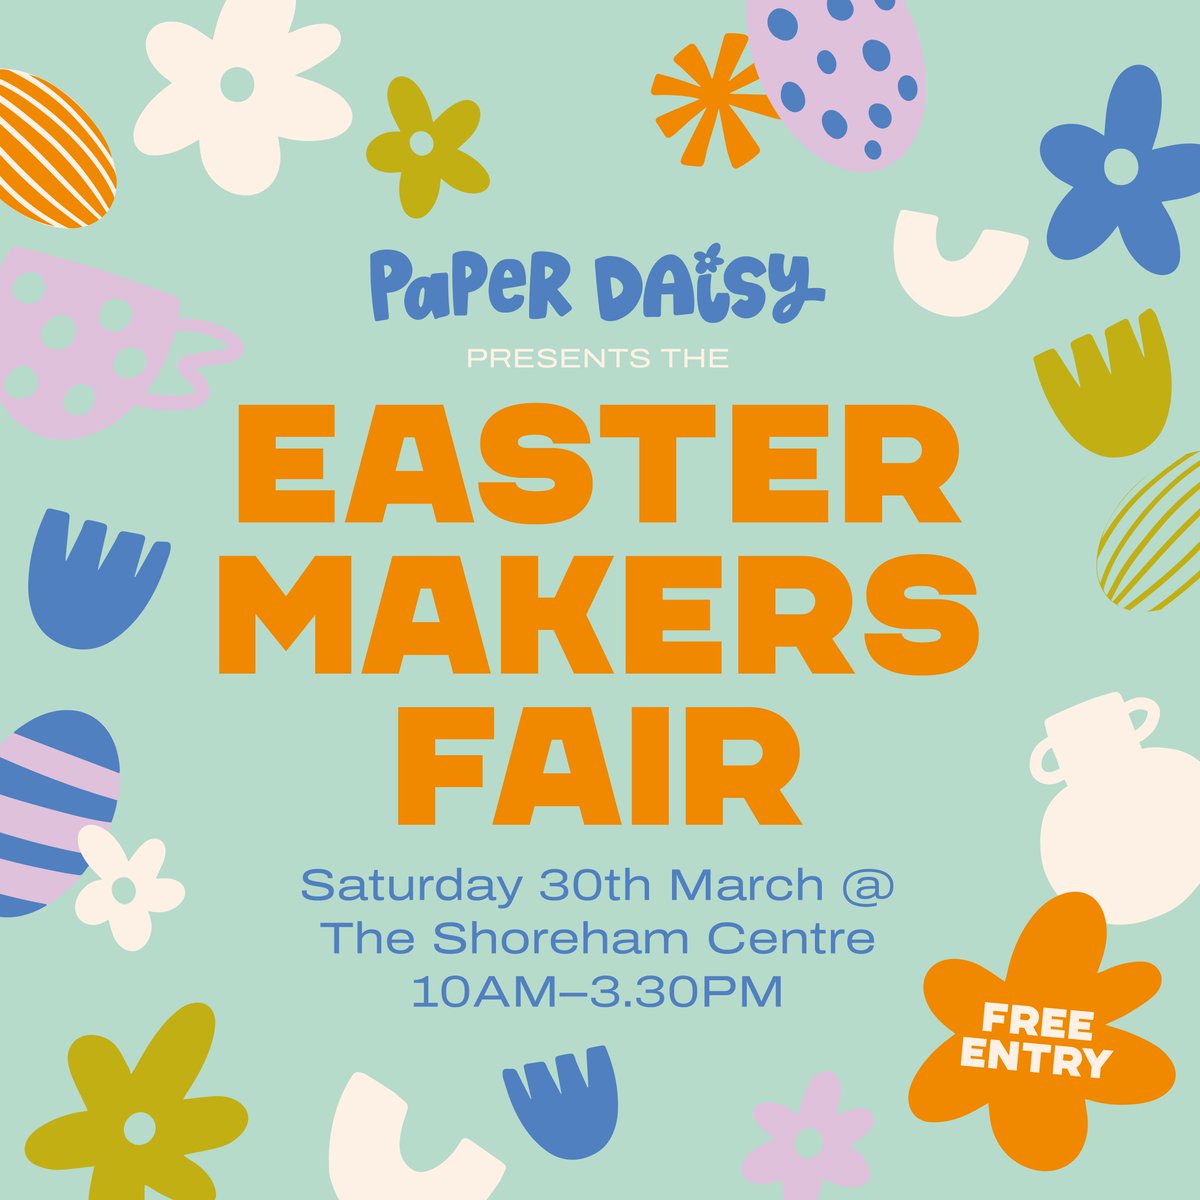 Catch us on Saturday at the Shoreham Centre from 10am to 3.30pm with @paperdaisyevents
-
#JCocoa #BeanToBar #ChocolateMaker #Chocolate #SingleOriginChocolate #Recyclable #MadeInBritain #Brighton #BrightonFood #BrightonFoodies #BrightonChocolate #SussexFood #SussexFoodies